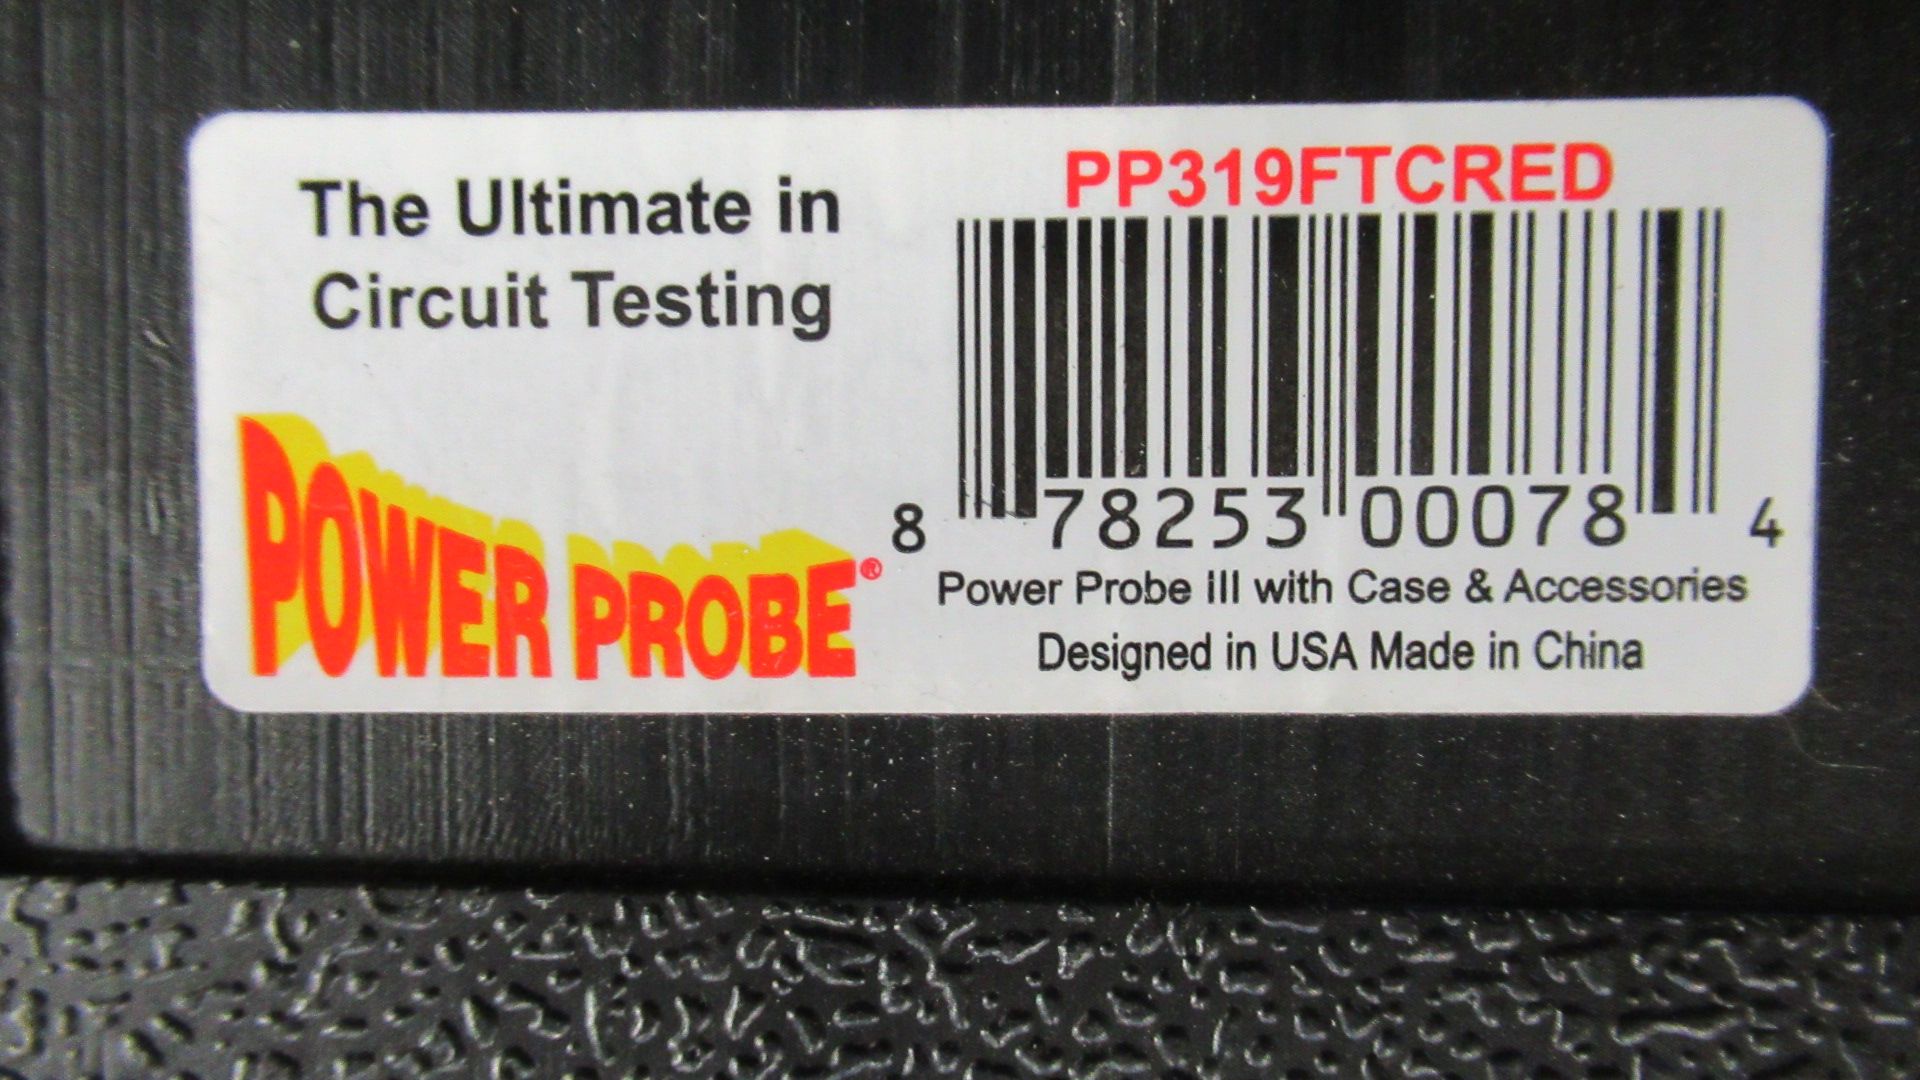 POWER PROBE lll CIRCUIT TESTER PP319FTCRED - Image 2 of 2